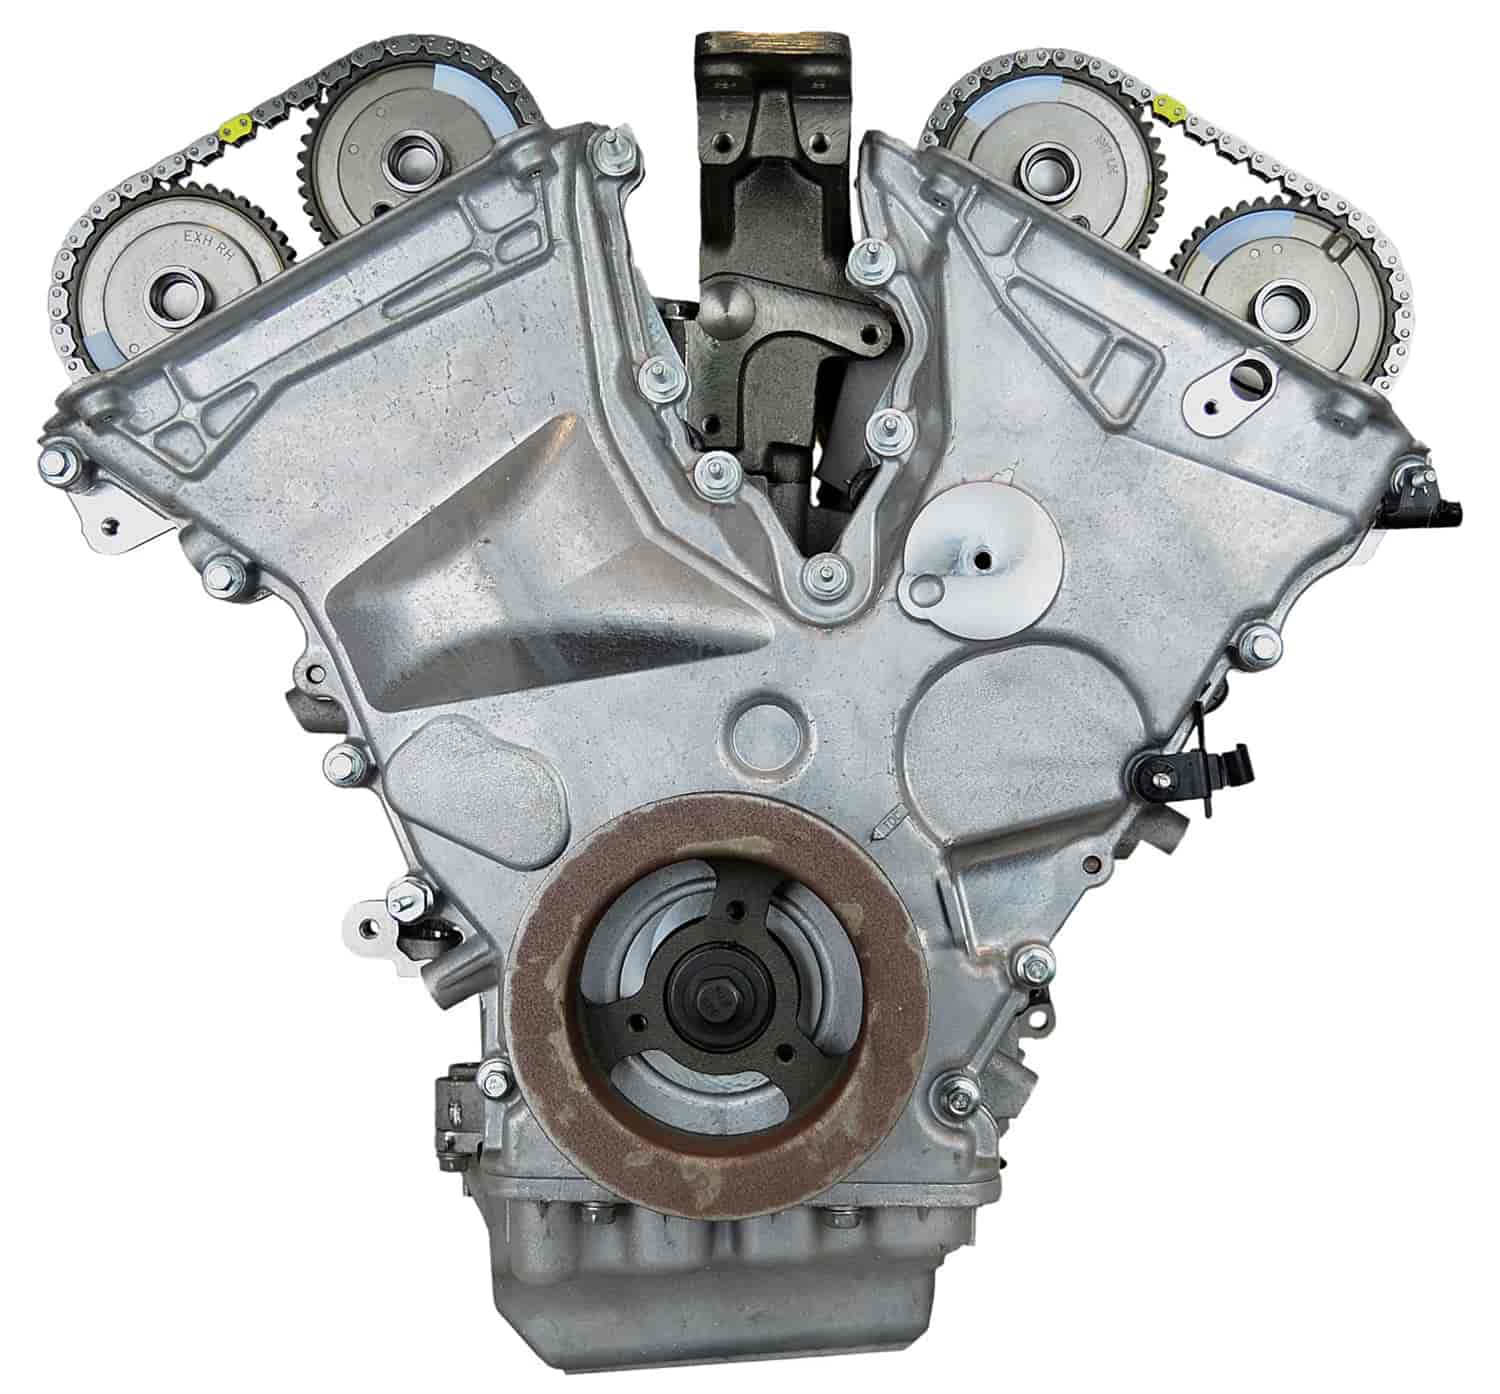 Remanufactured Crate Engine for 2004-2006 Mazda MPV with